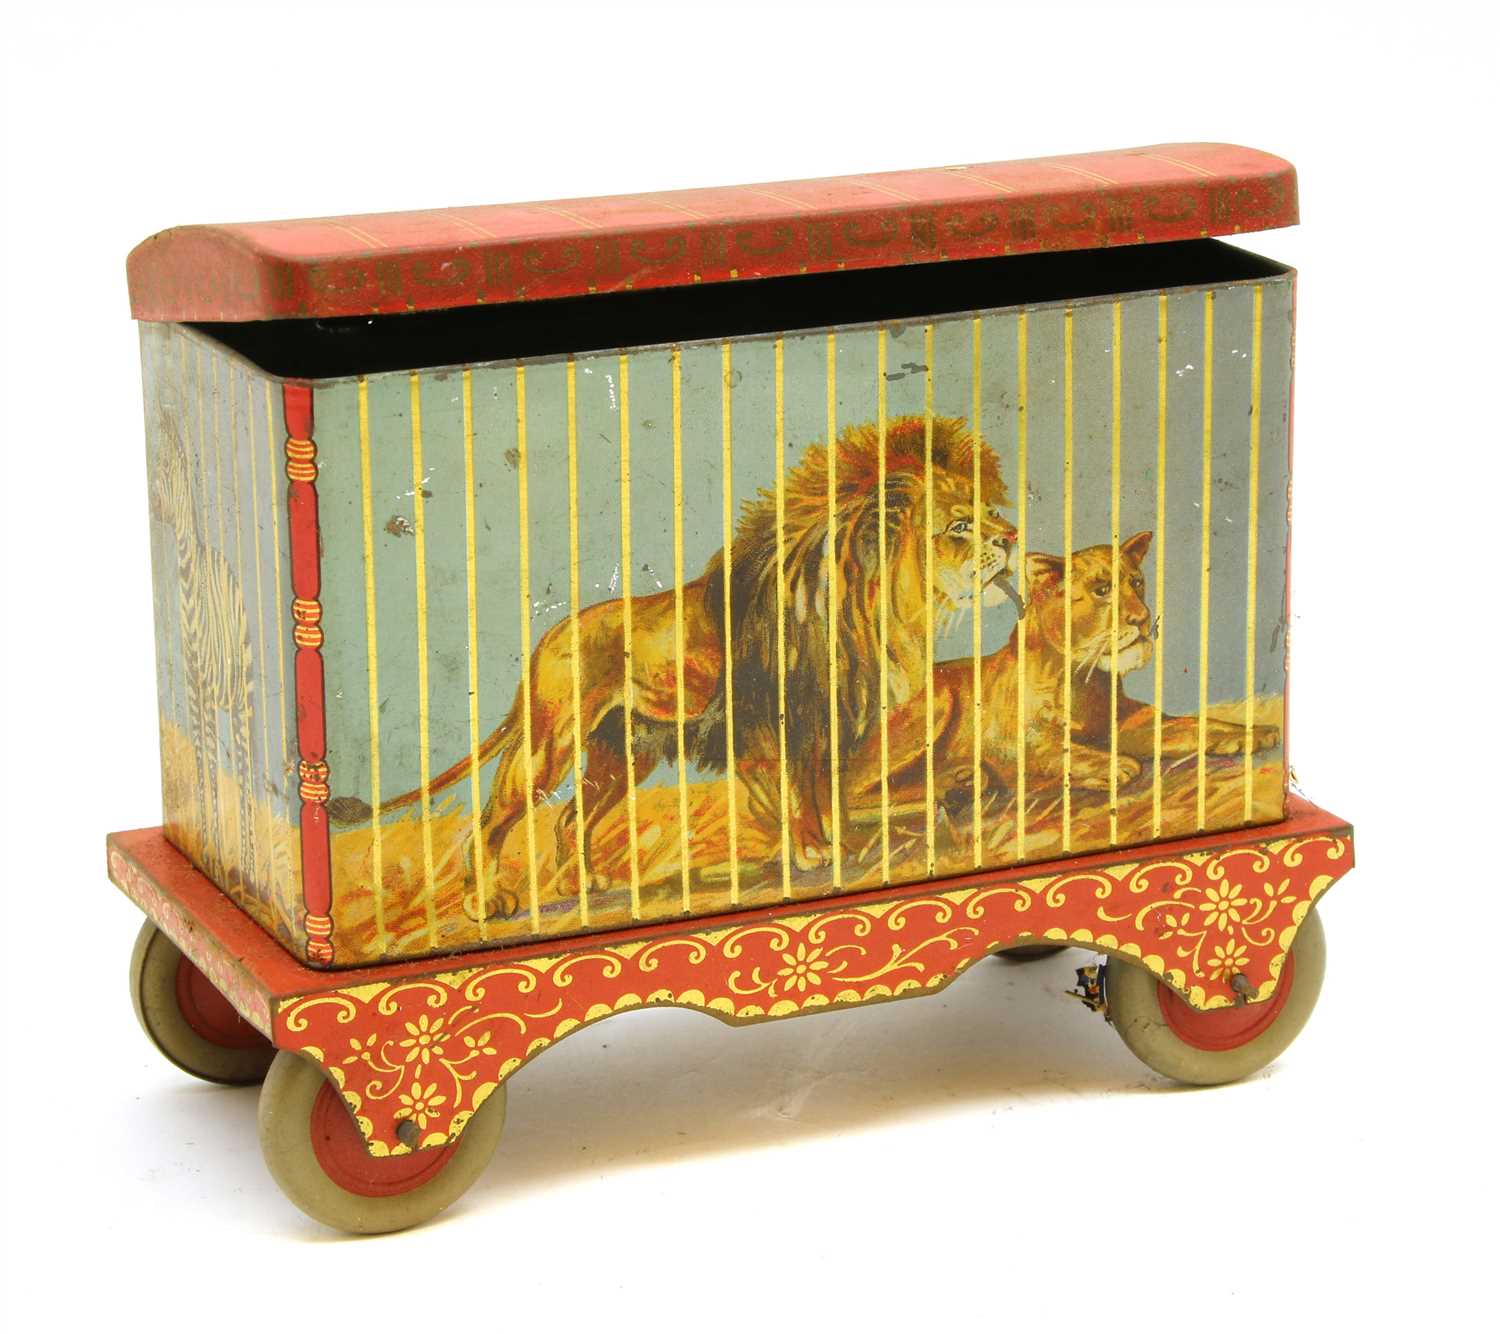 Lot 1200 - A William Crawford & Sons circus biscuit tin